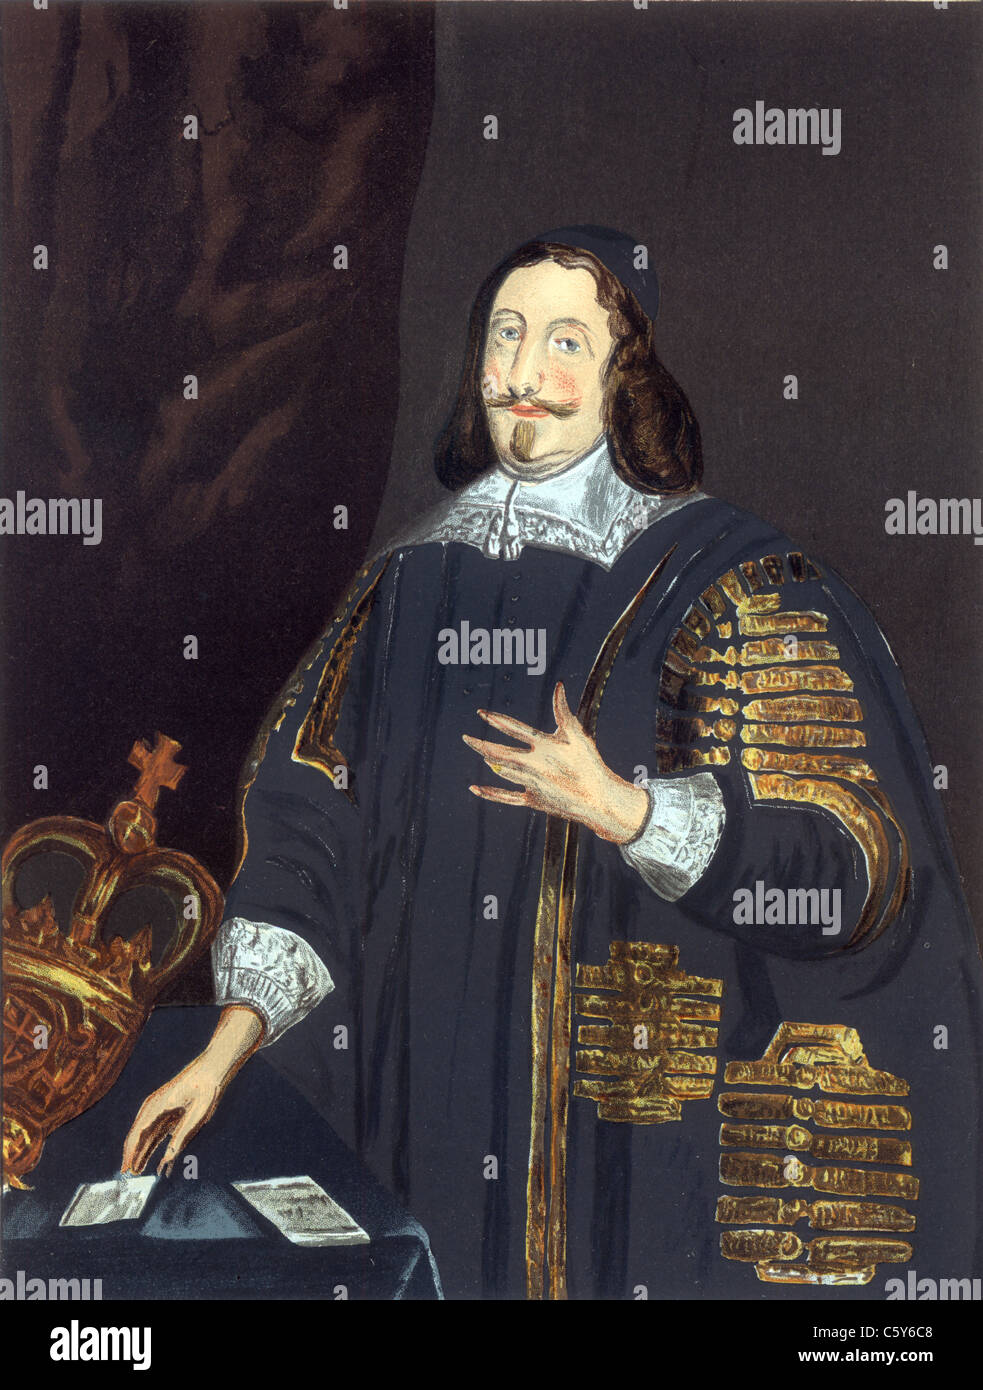 William Lenthall, Speaker of the House of Commons, ; Black and White Illustration; Stock Photo